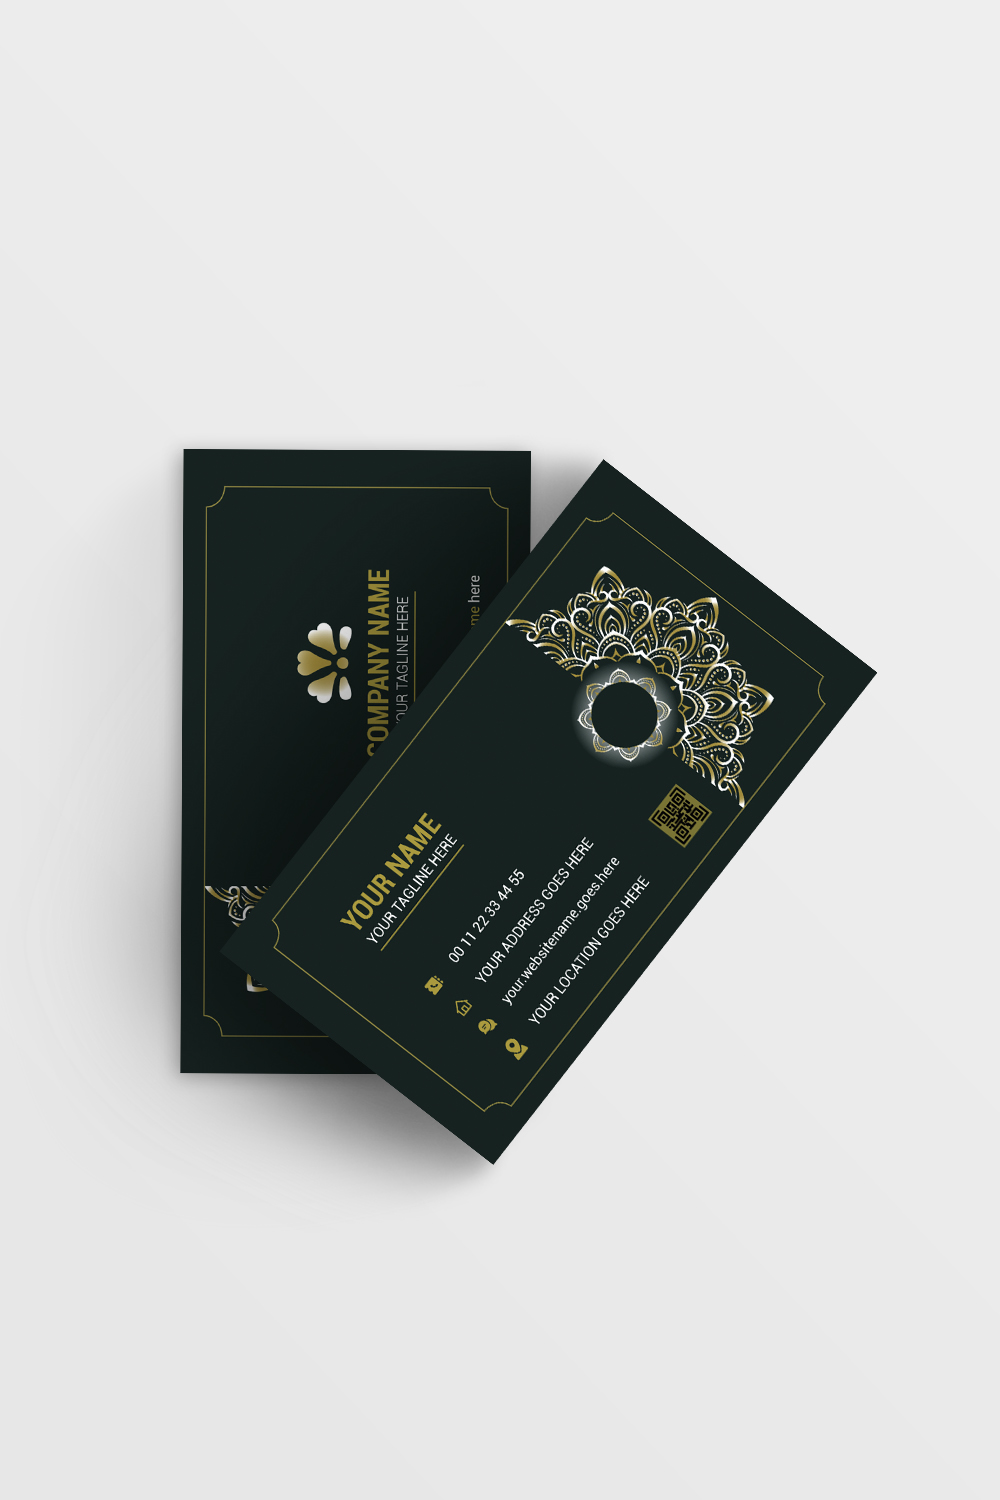 luxury mandala blue color corporate business card design template with gold border pinterest preview image.